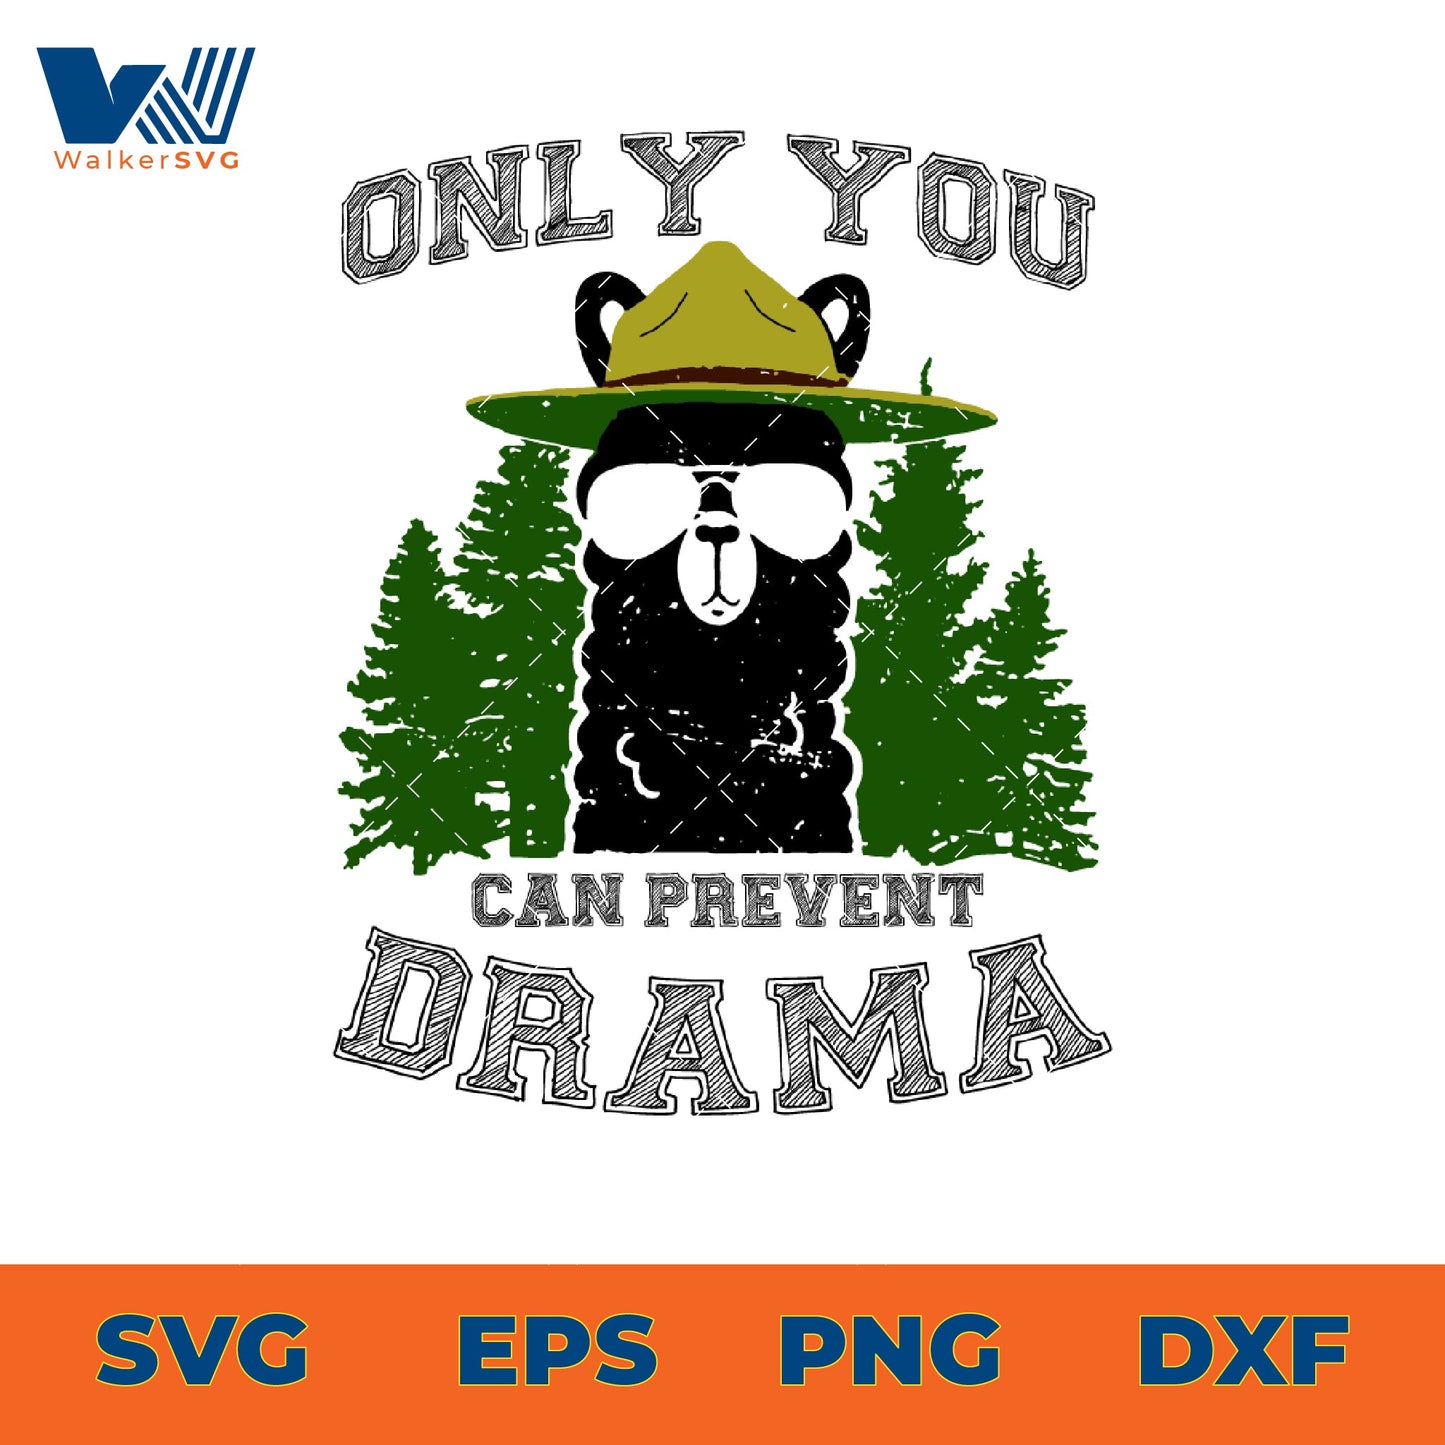 Only You Can Prevent Drama SVG